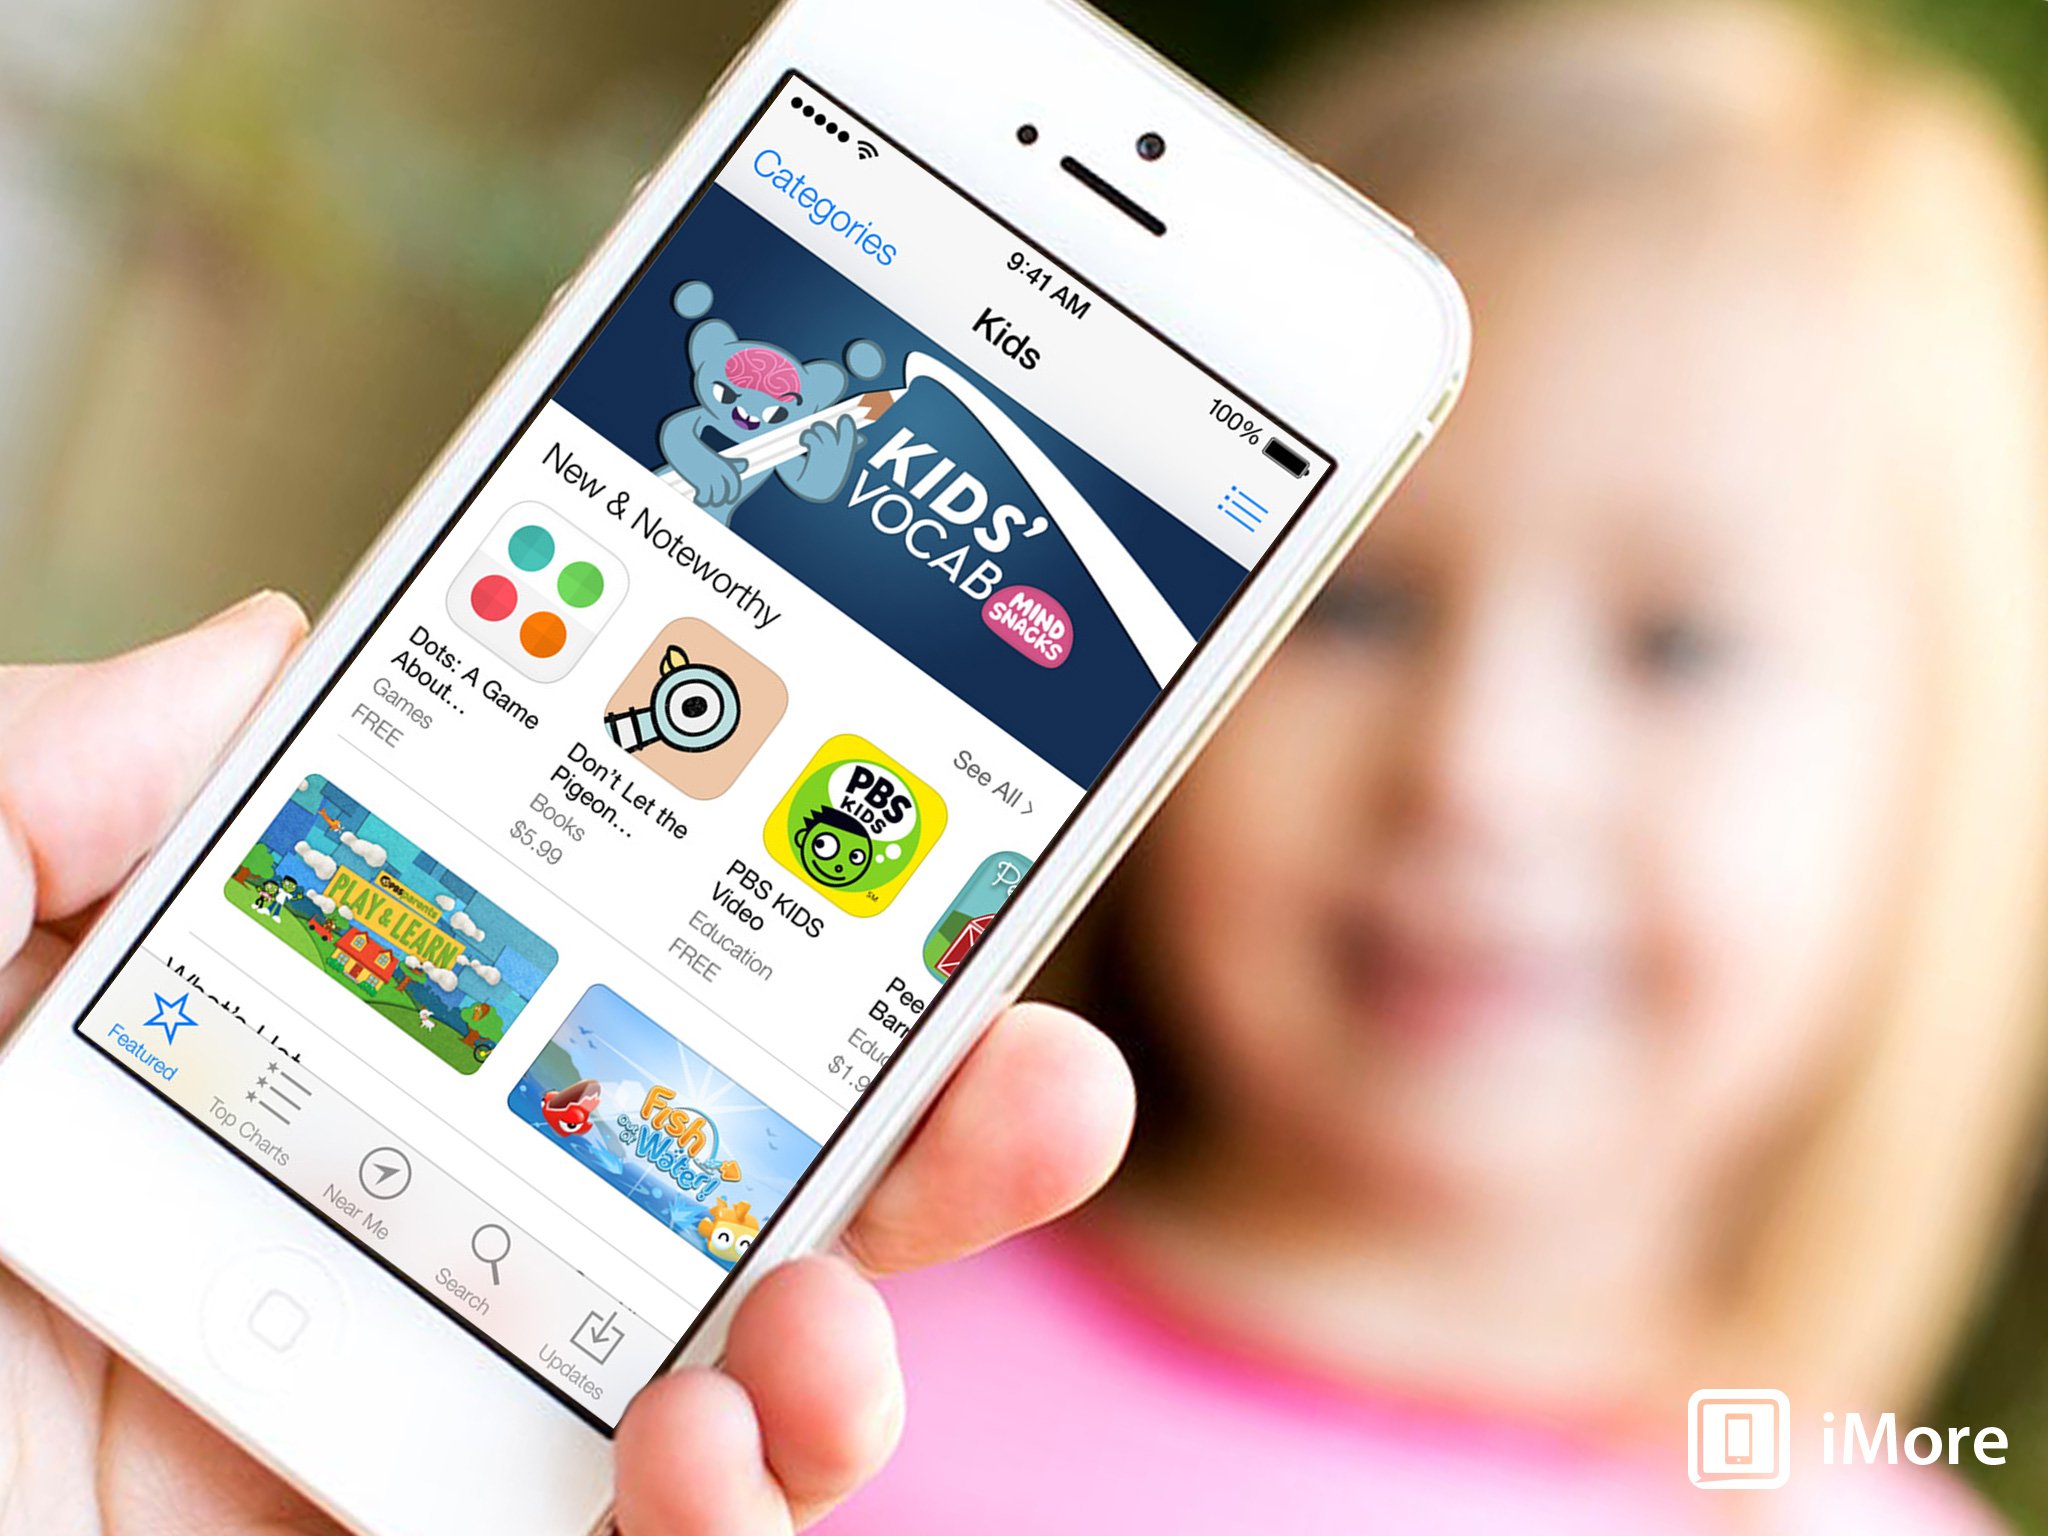 15 free toddler games (without hidden in-app purchases!) worth downloading  -  Resources